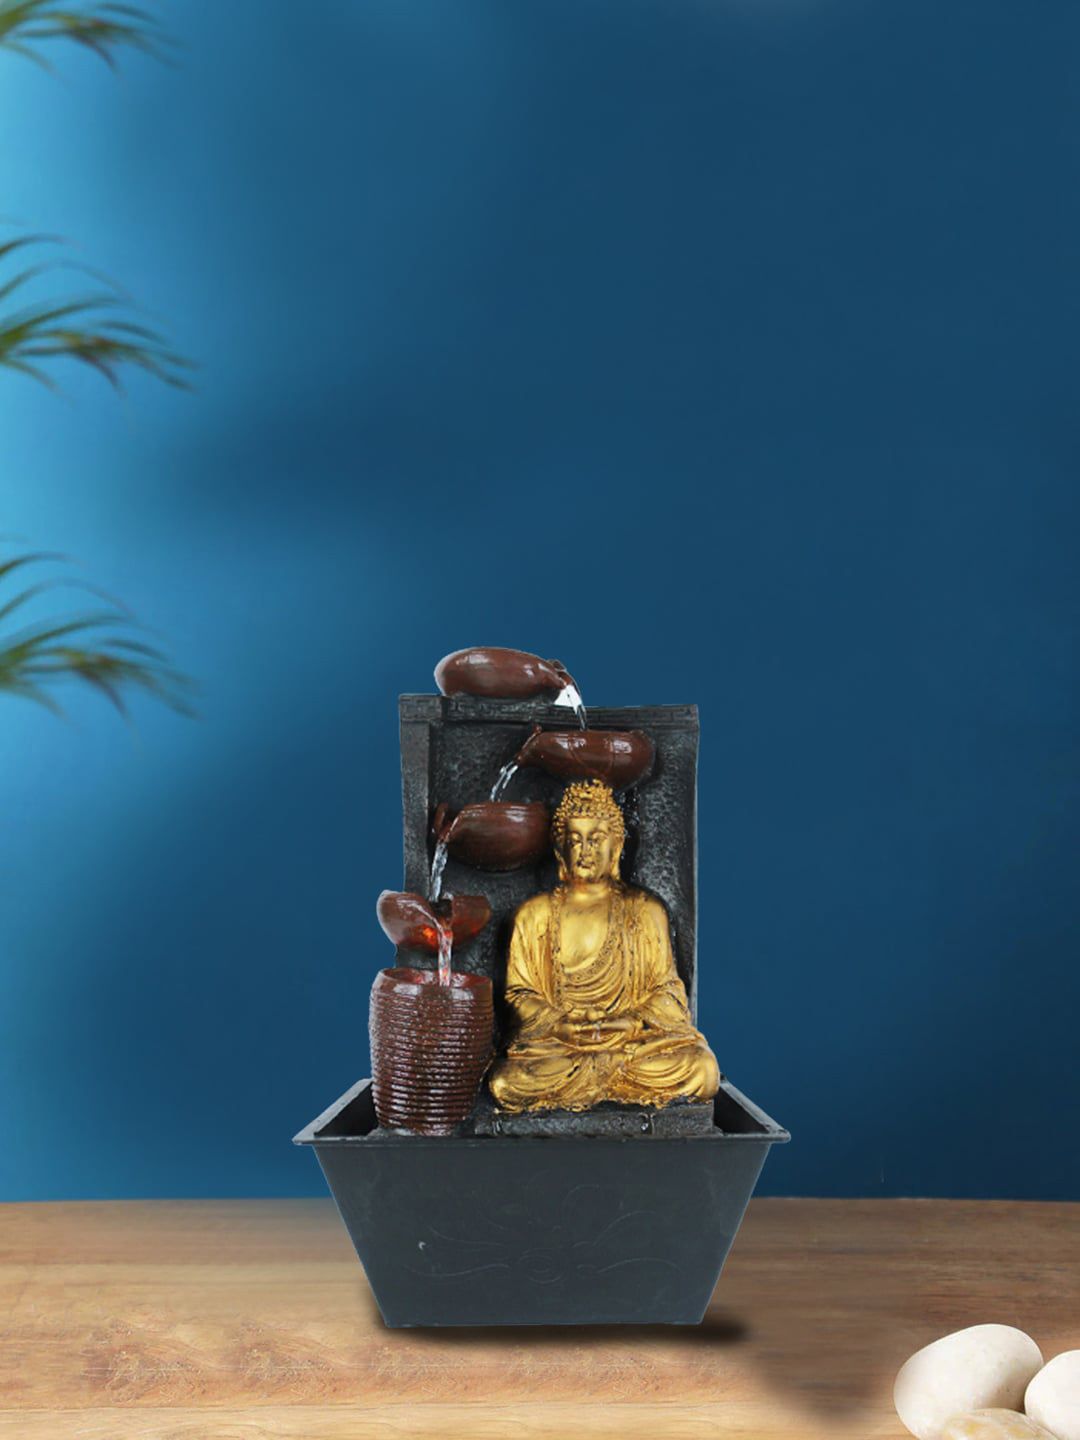 Wonderland Golden Table top Buddha Fountain Price in India